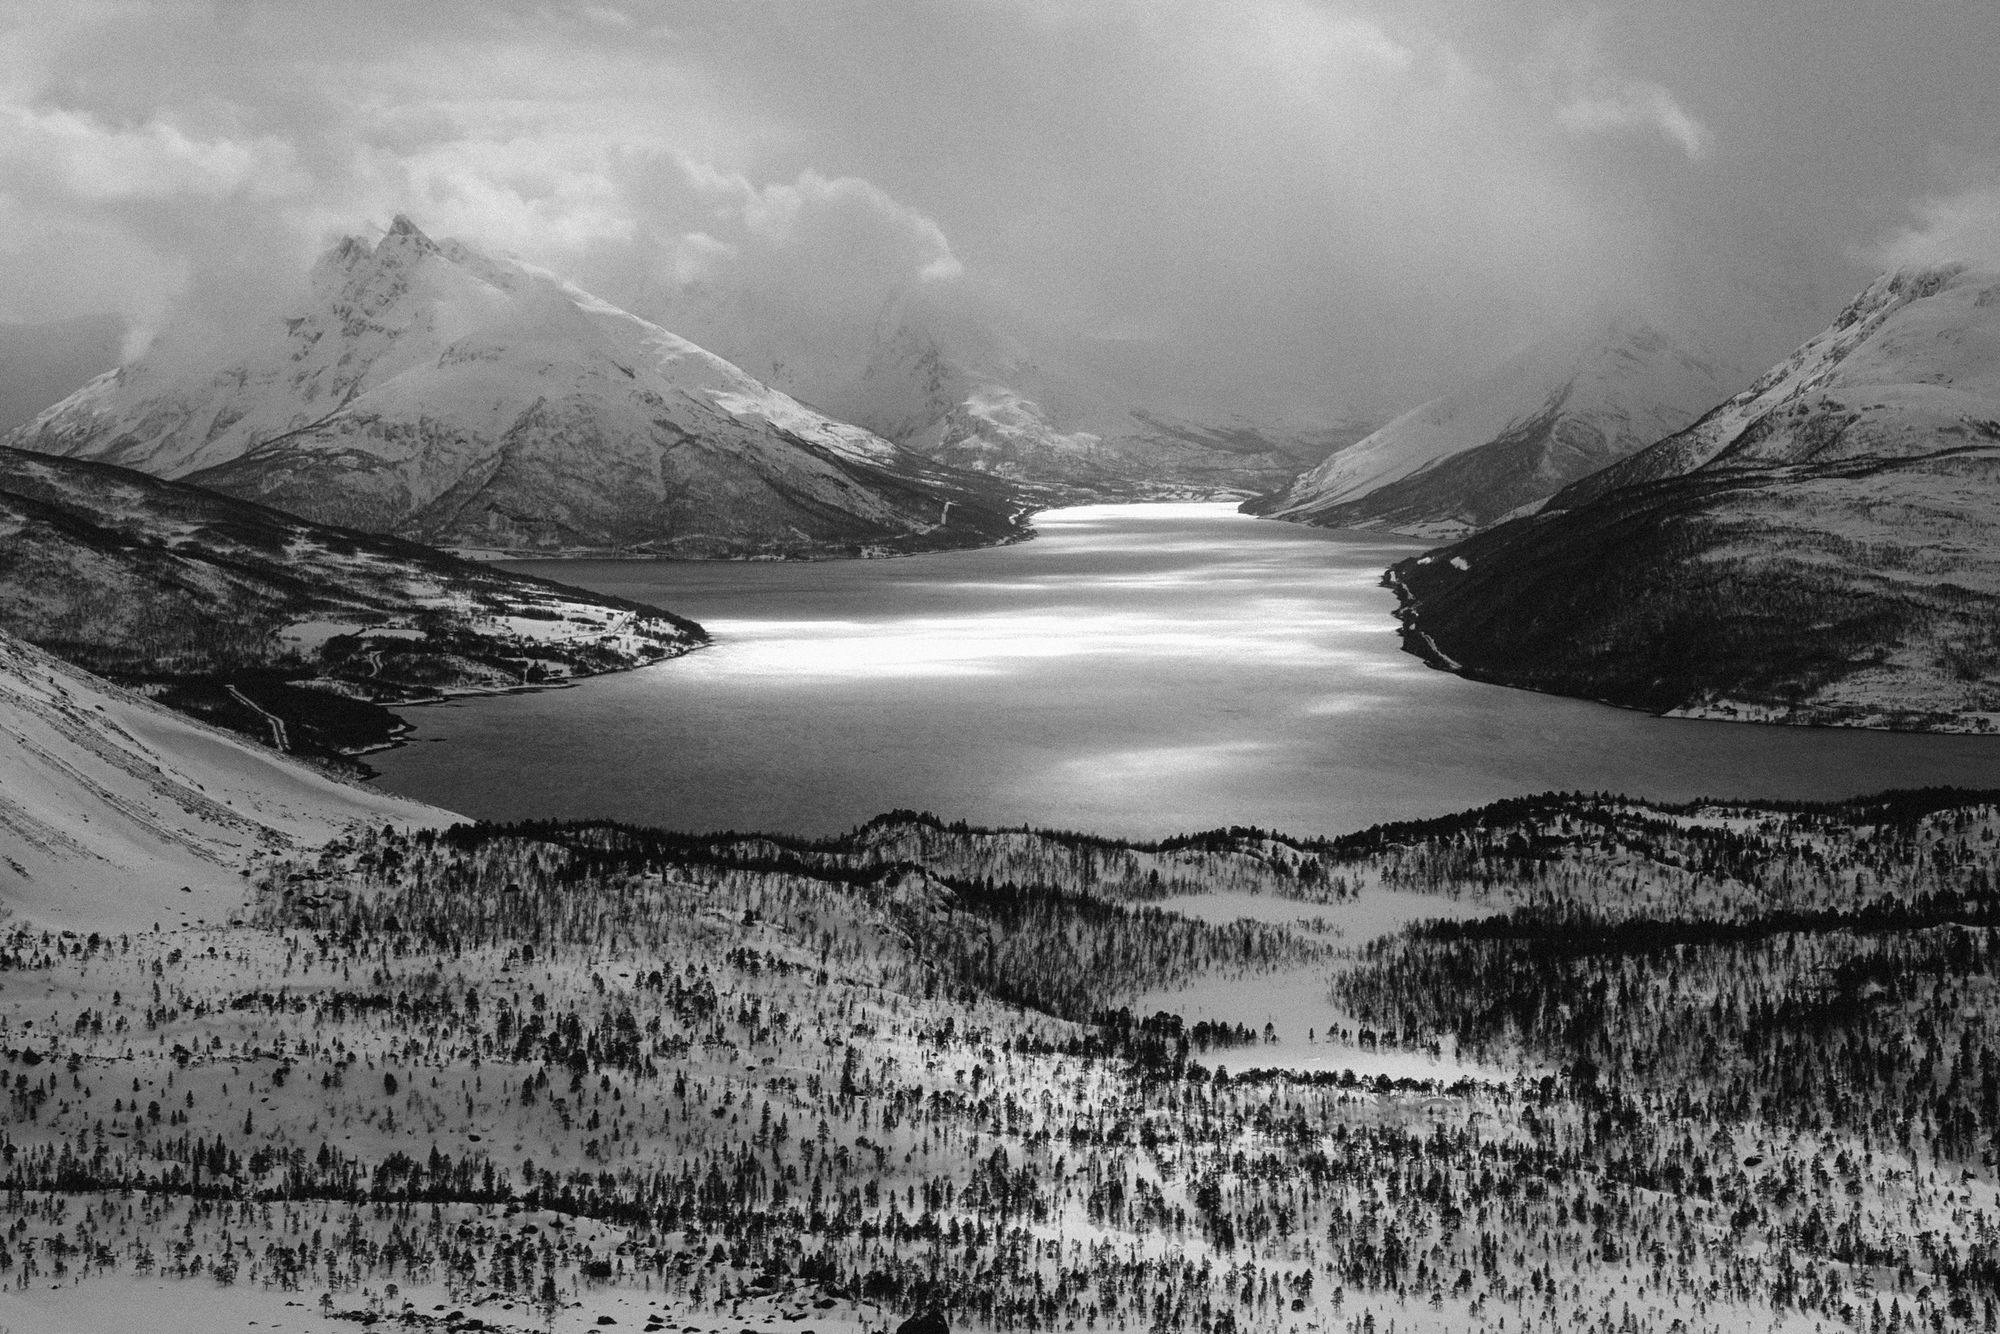 A black and white photo of a snowy fjord